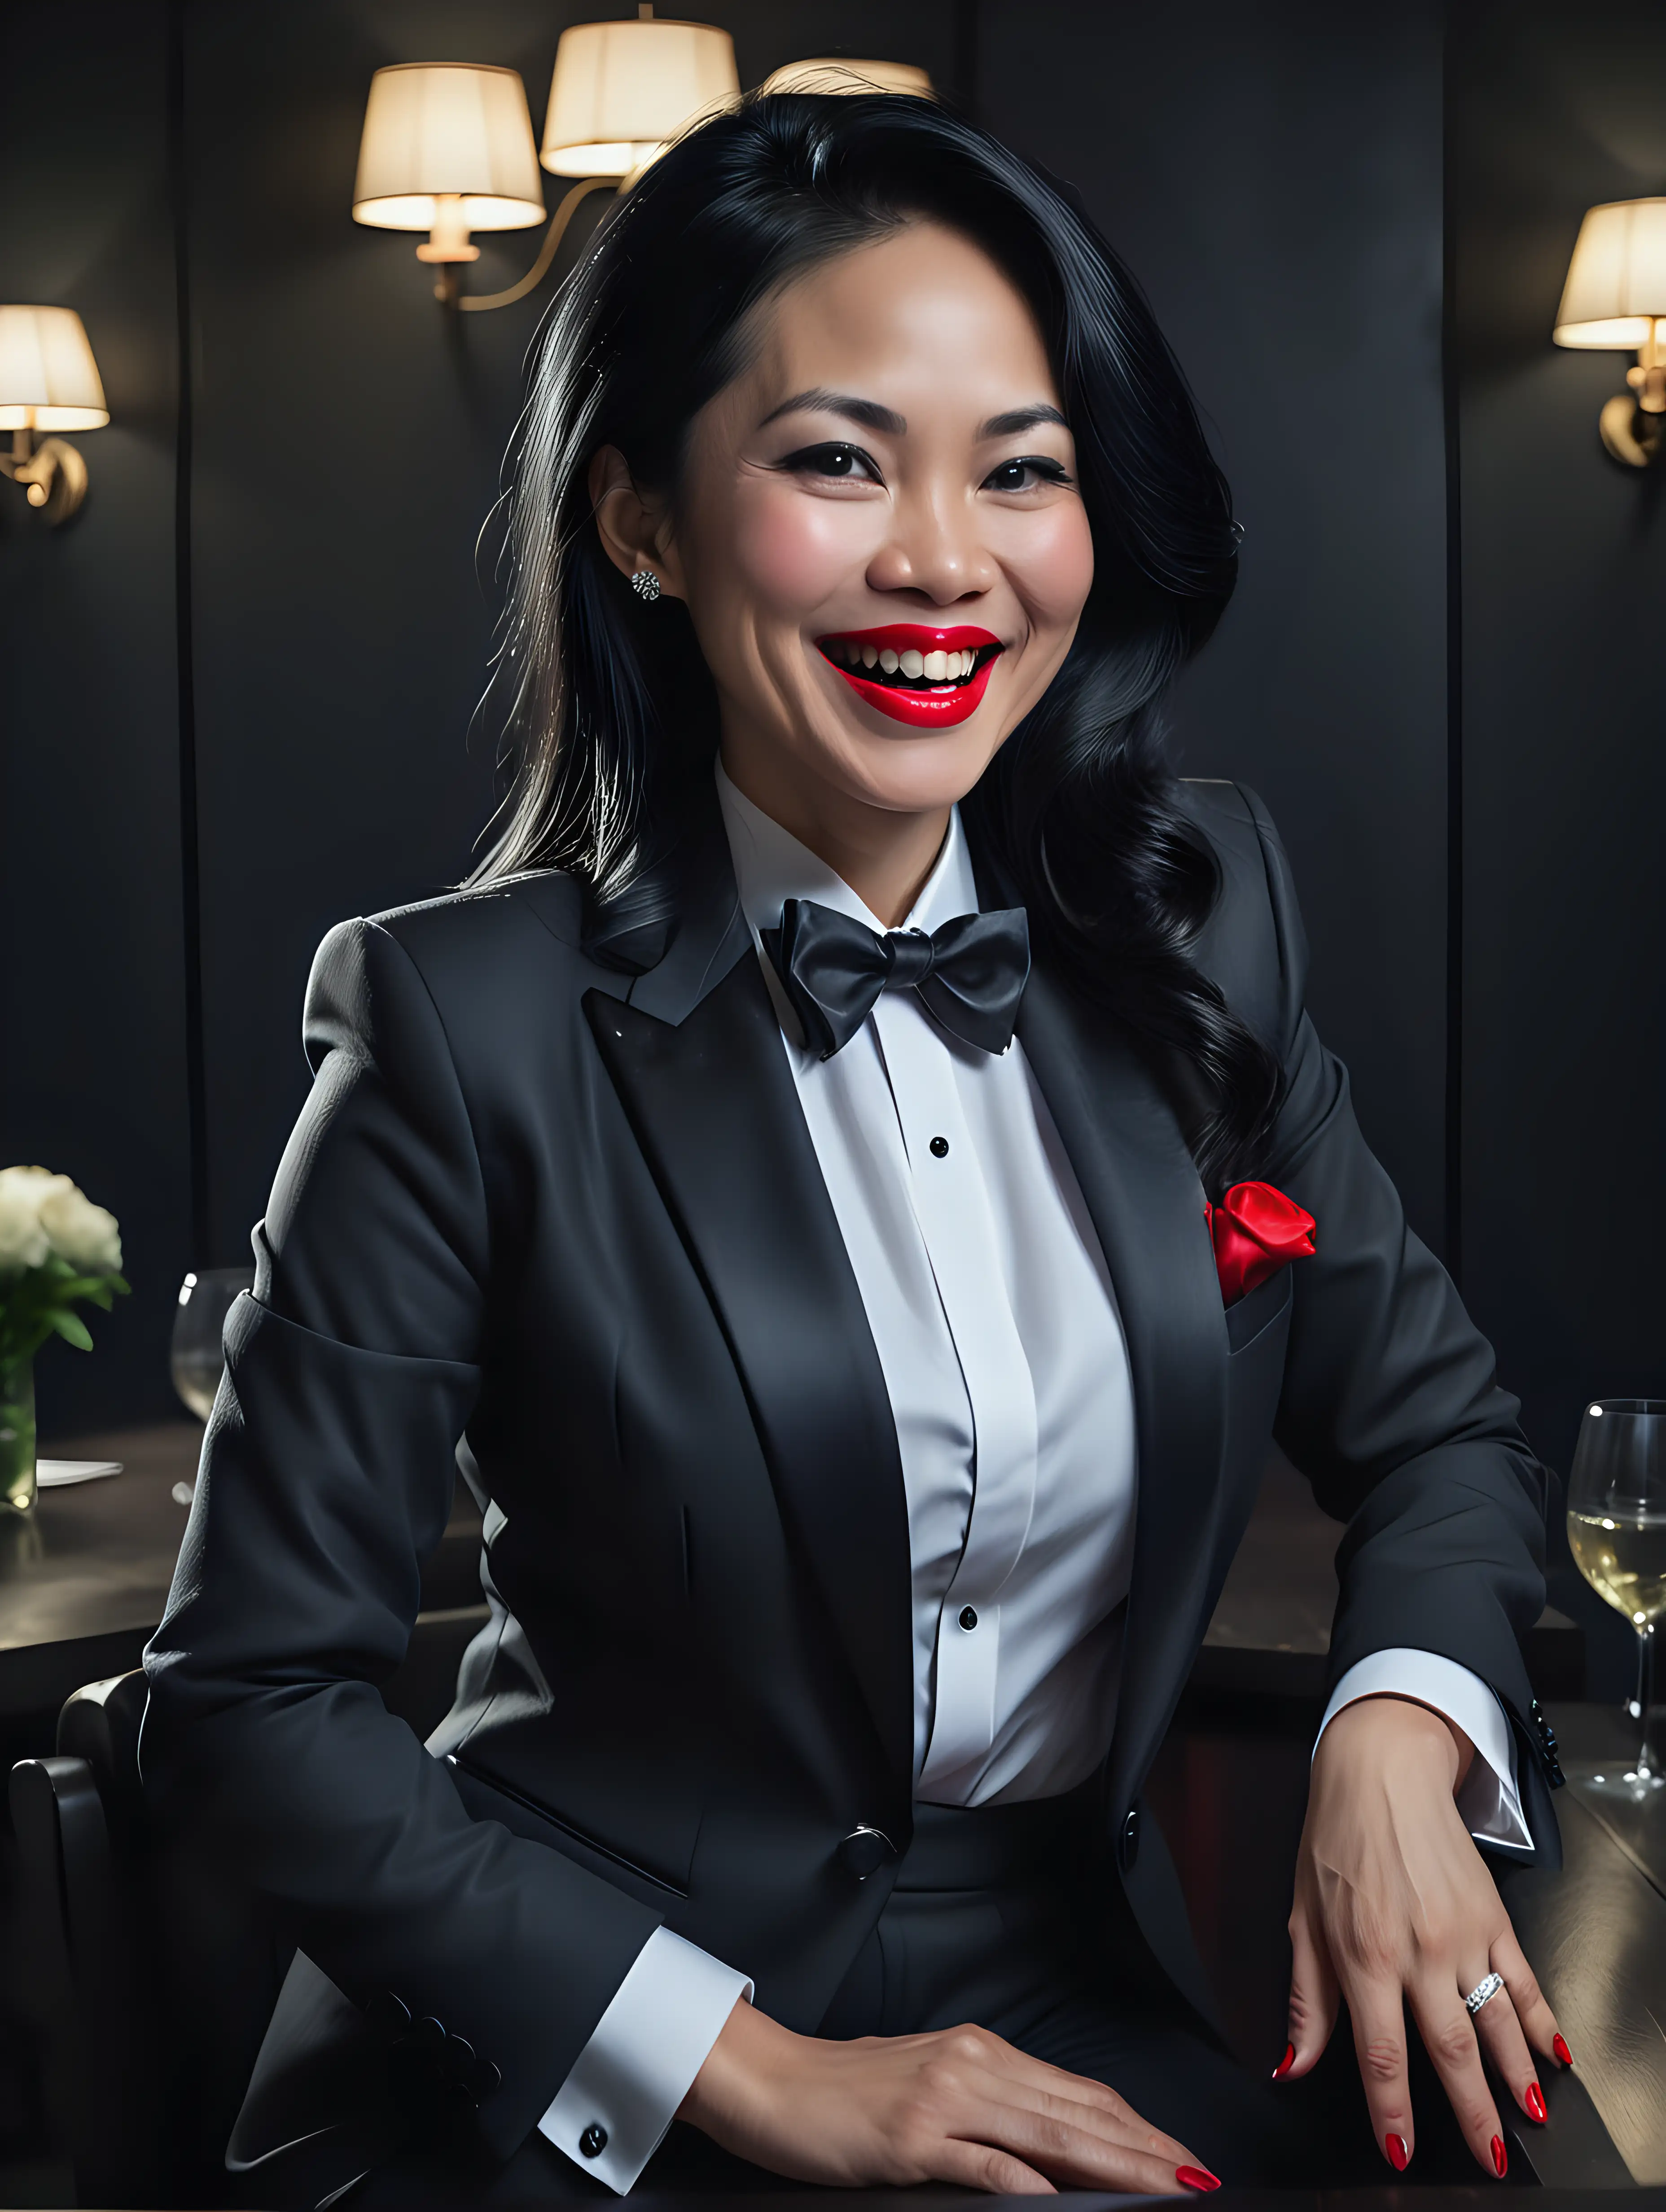 A pretty 40 year old Vietnamese woman with long black hair and red lipstick is sitting at a table in a dark room. She is smiling and joyful and ecstatic. She is wearing a tuxedo. (Her jacket is open.) (Her pants are black.) Her shirt is white with a black bow tie. Her cufflinks are large and black. Her jacket has a corsage.